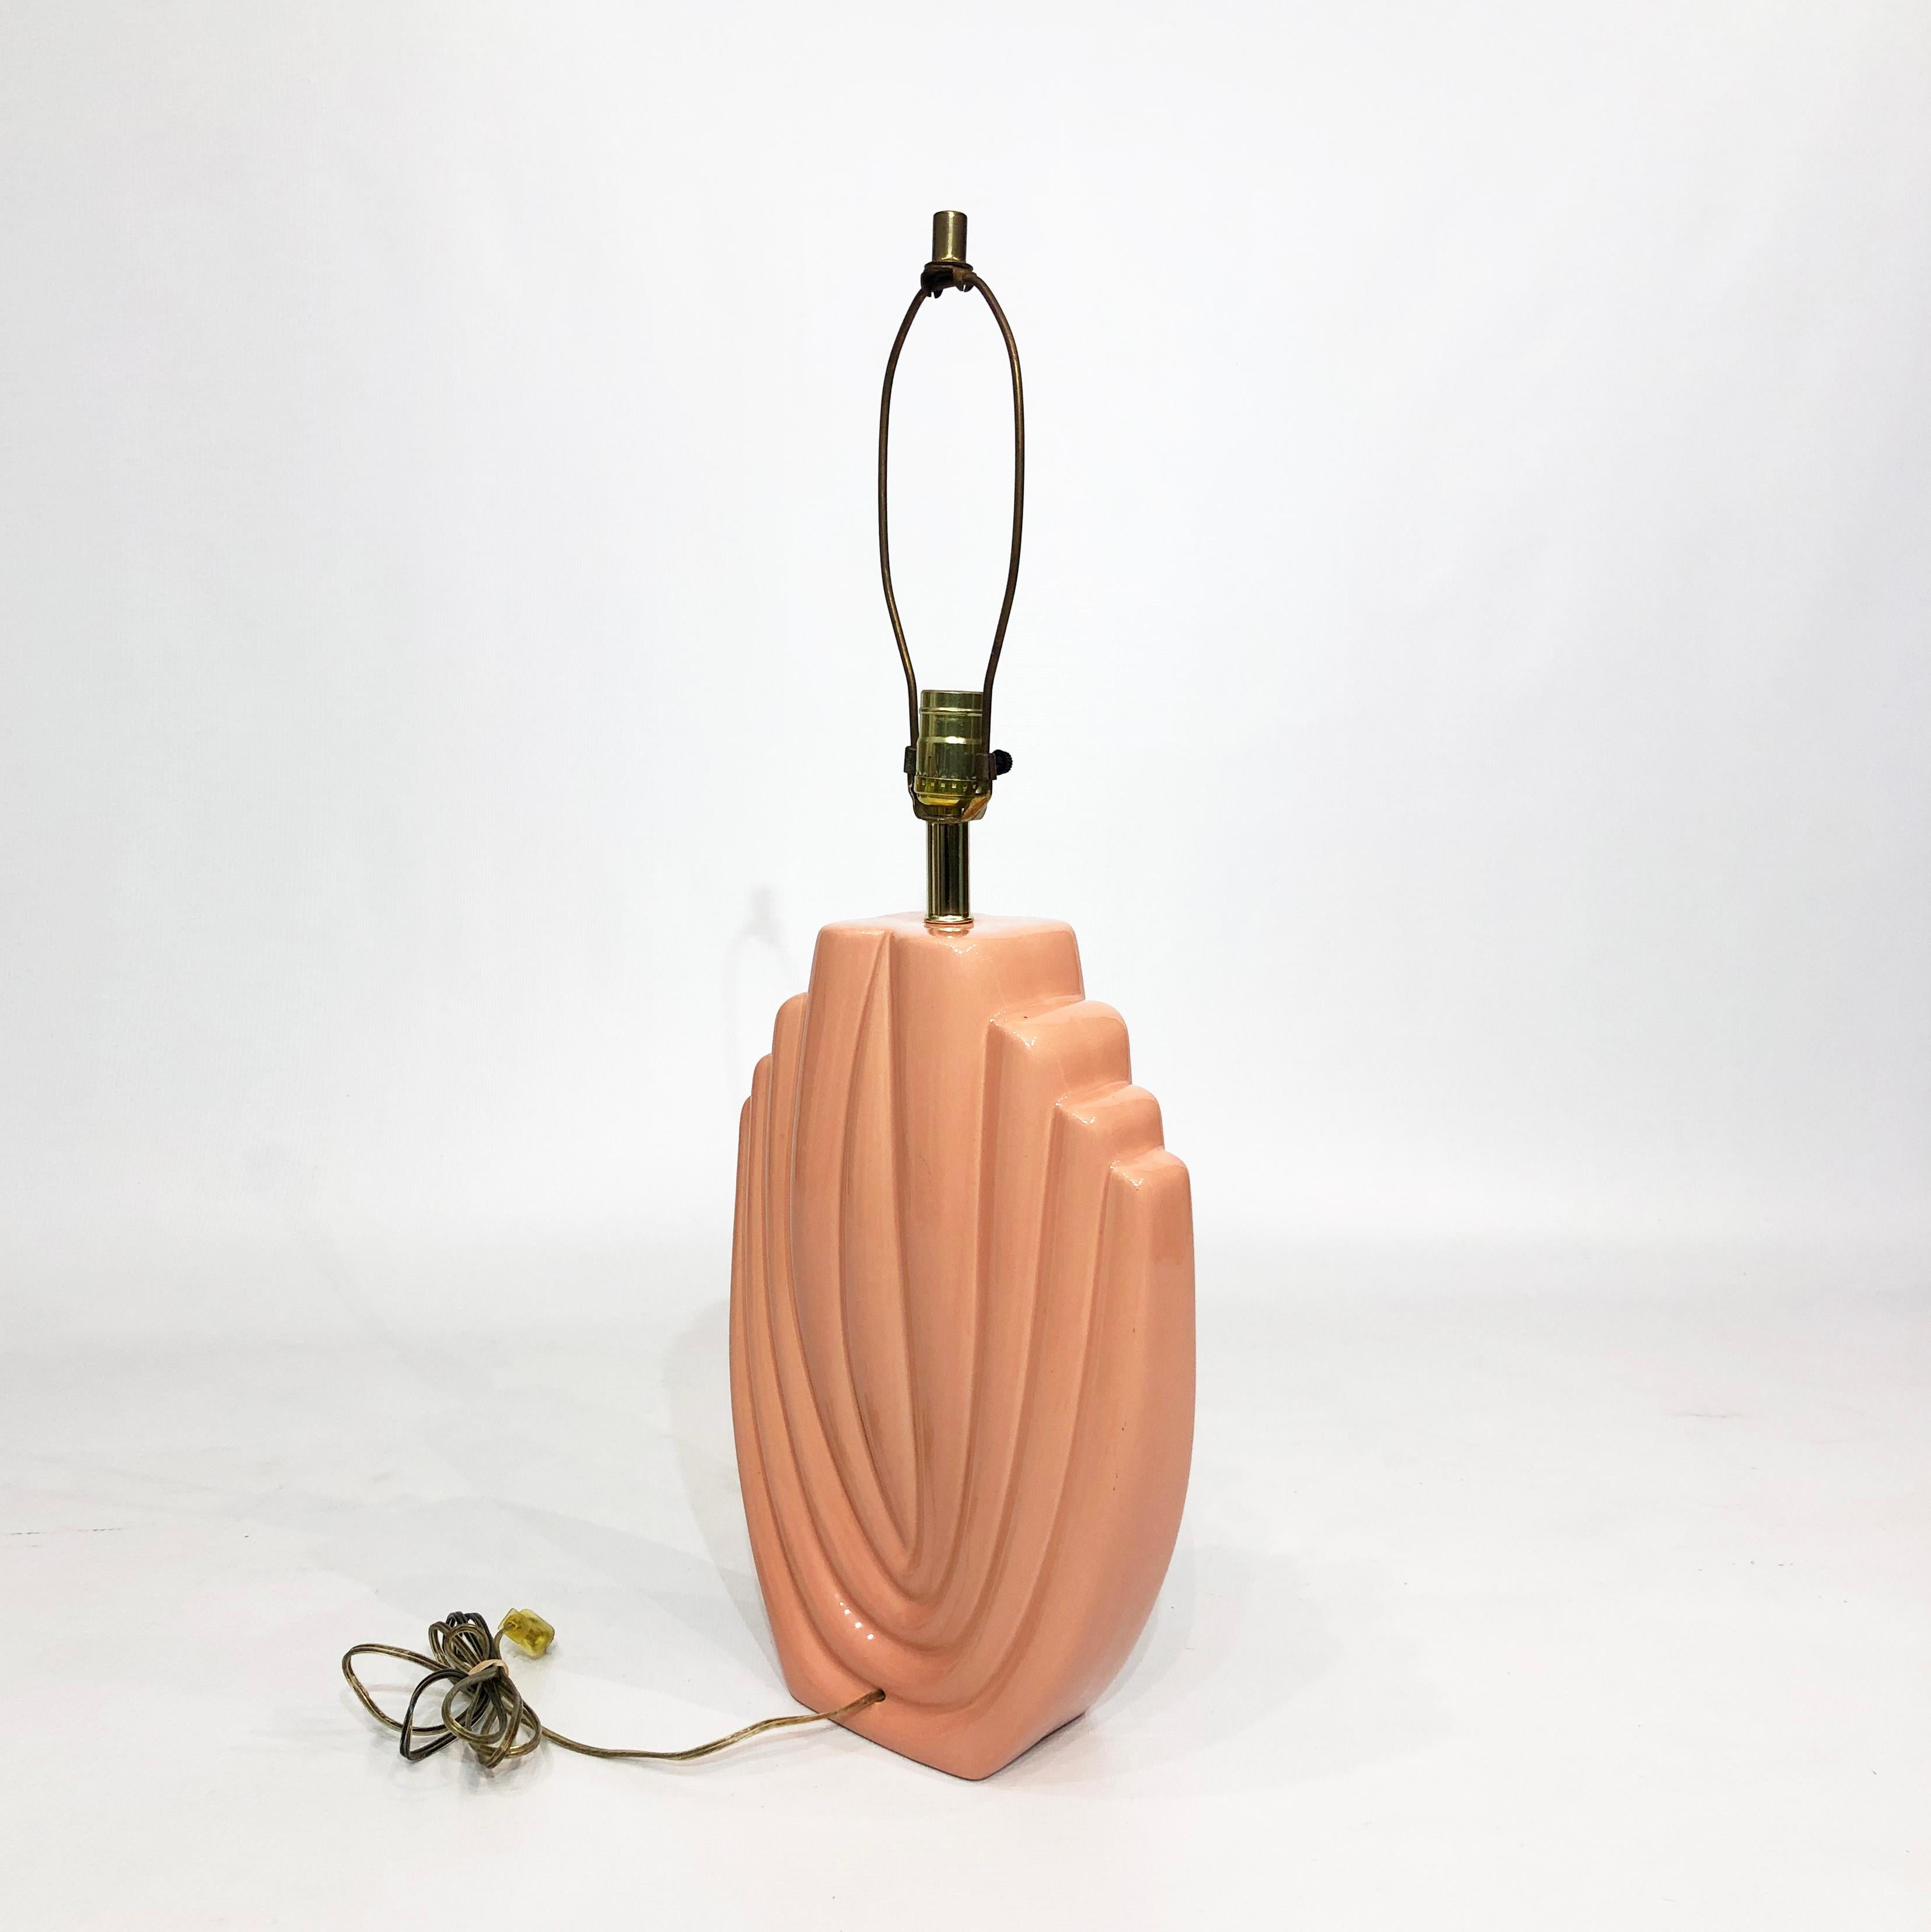 Salmon Pink Ceramic Table Lamp 1970s Art Deco Style Hollywood Regency Pastel For Sale 3